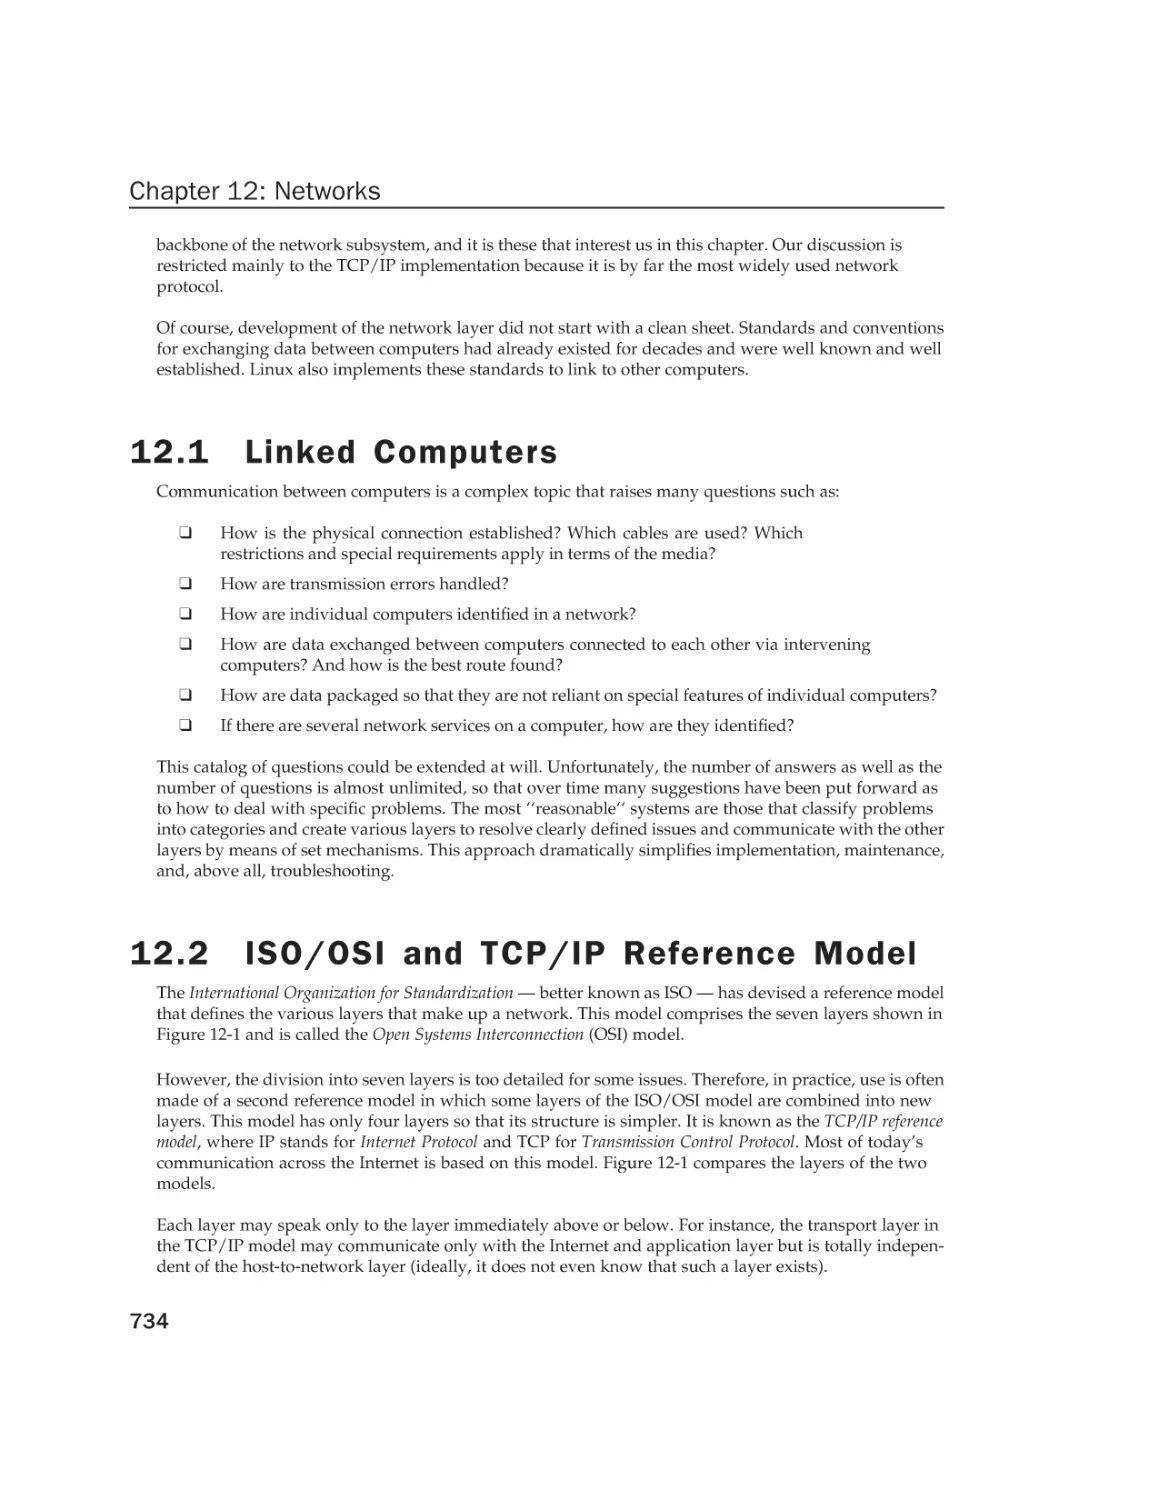 12.1 Linked Computers
12.2 ISO/OSI and TCP/IP Reference Model